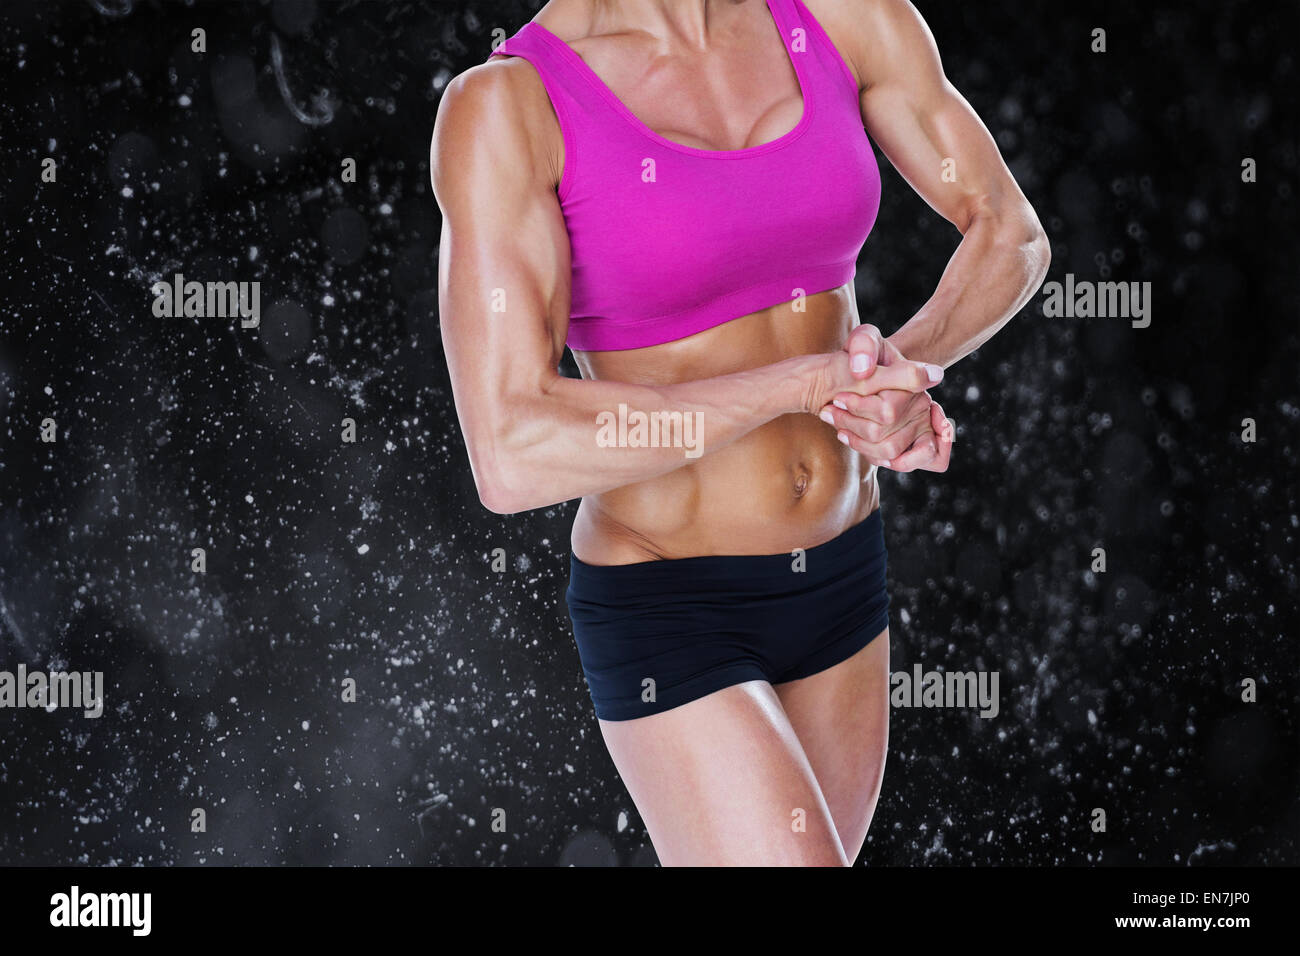 Composite image of female bodybuilder flexing in sports bra and shorts Stock Photo